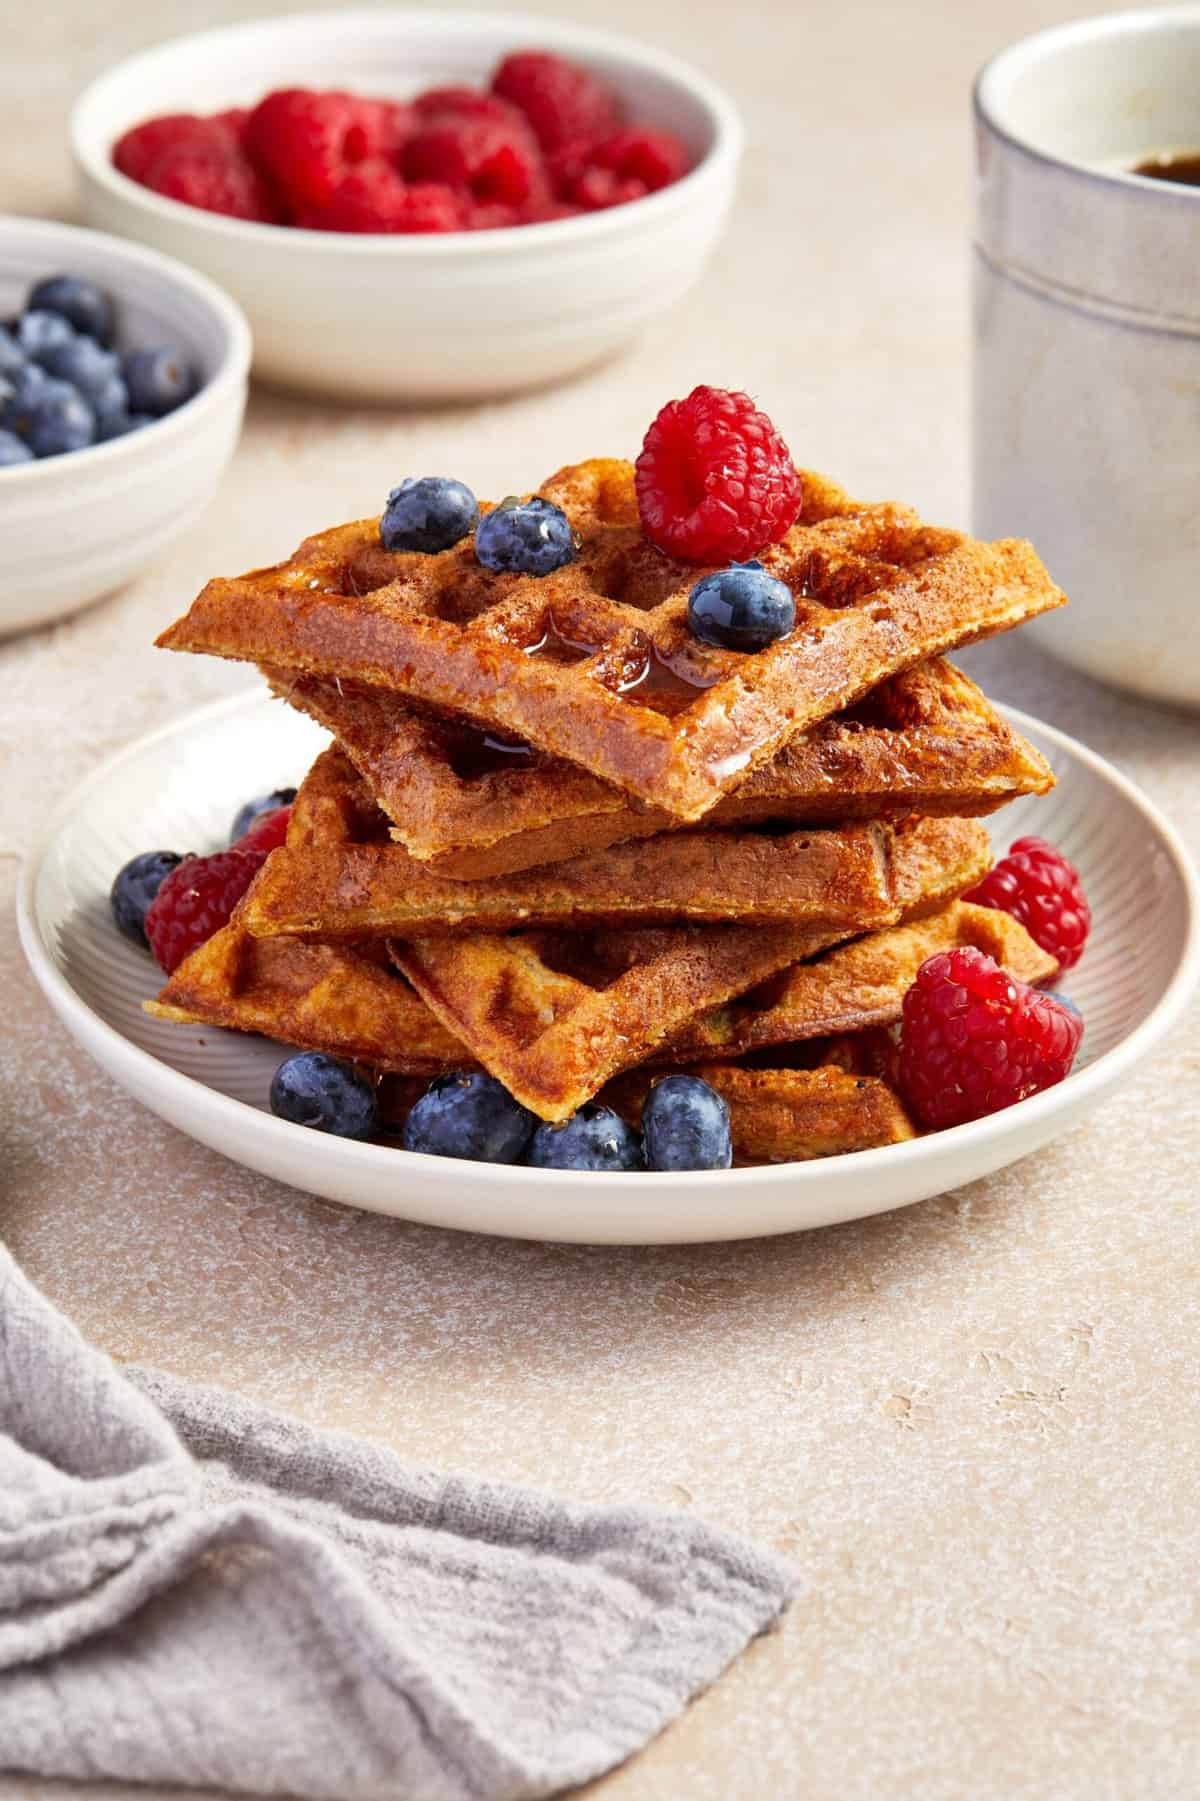 Round white plate with a stack of oat flour waffles, garnished with some raspberries and blueberries.